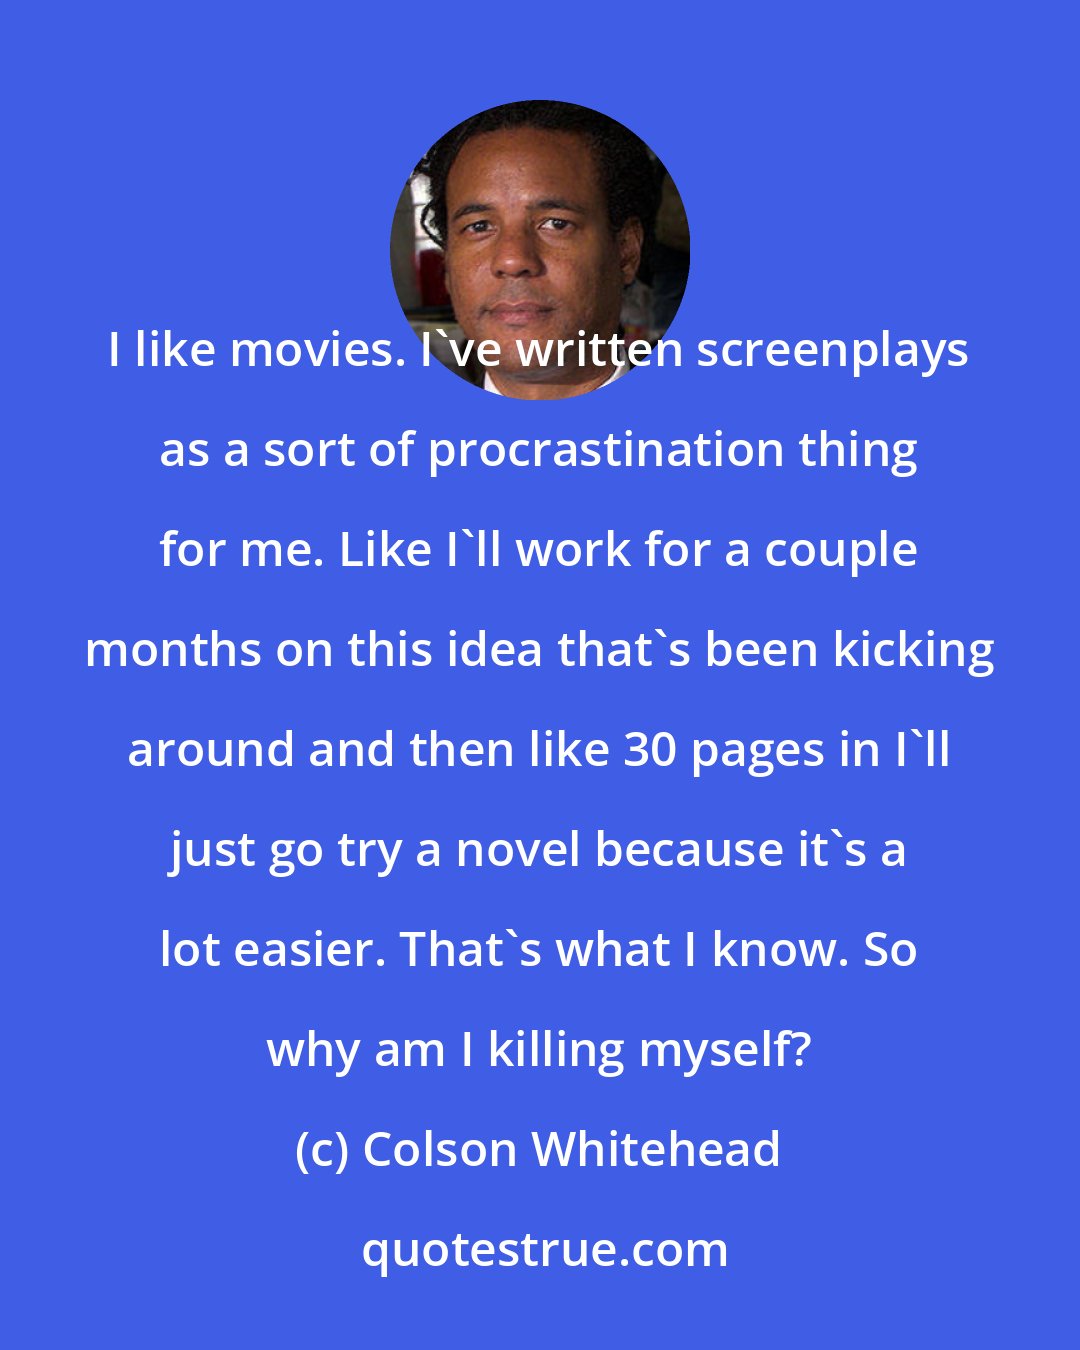 Colson Whitehead: I like movies. I've written screenplays as a sort of procrastination thing for me. Like I'll work for a couple months on this idea that's been kicking around and then like 30 pages in I'll just go try a novel because it's a lot easier. That's what I know. So why am I killing myself?